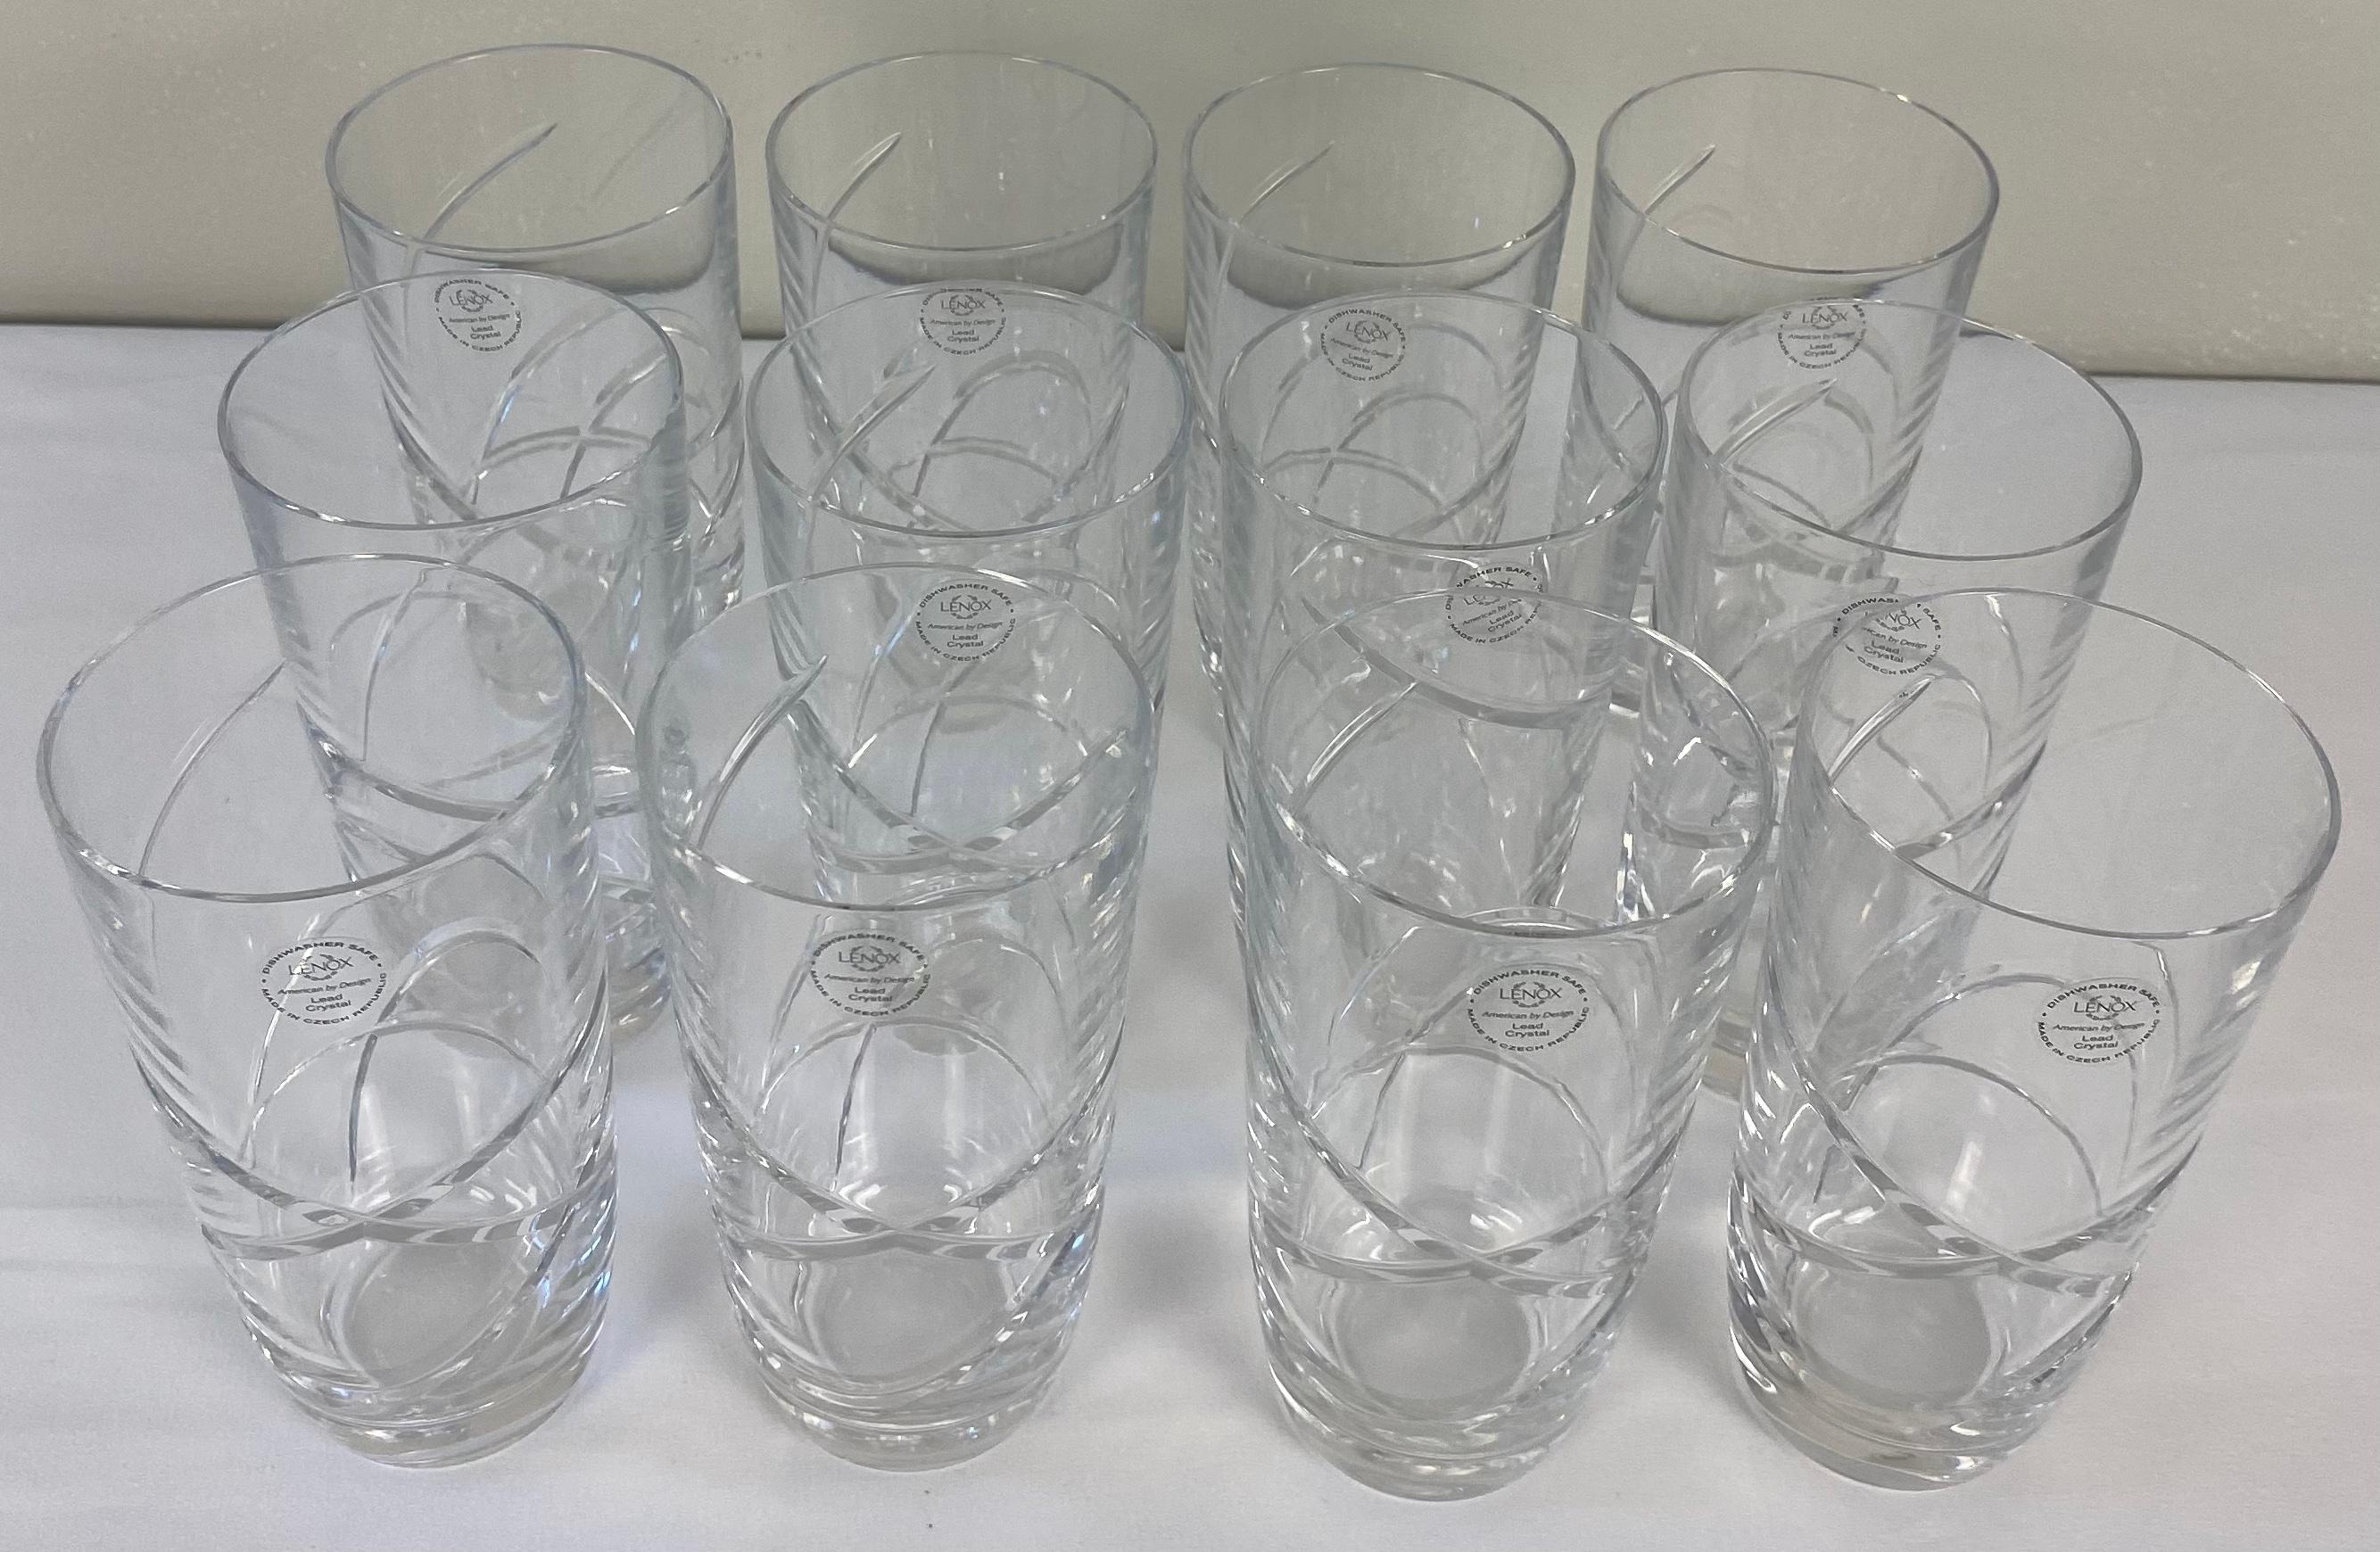 A fine high quality vintage set of 12 cut crystal water glasses by Lenox.
Dishwasher safe. American design made in the Czech Republic.

Very good condition, most of these vintage glasses have never been used and still have the original labels on